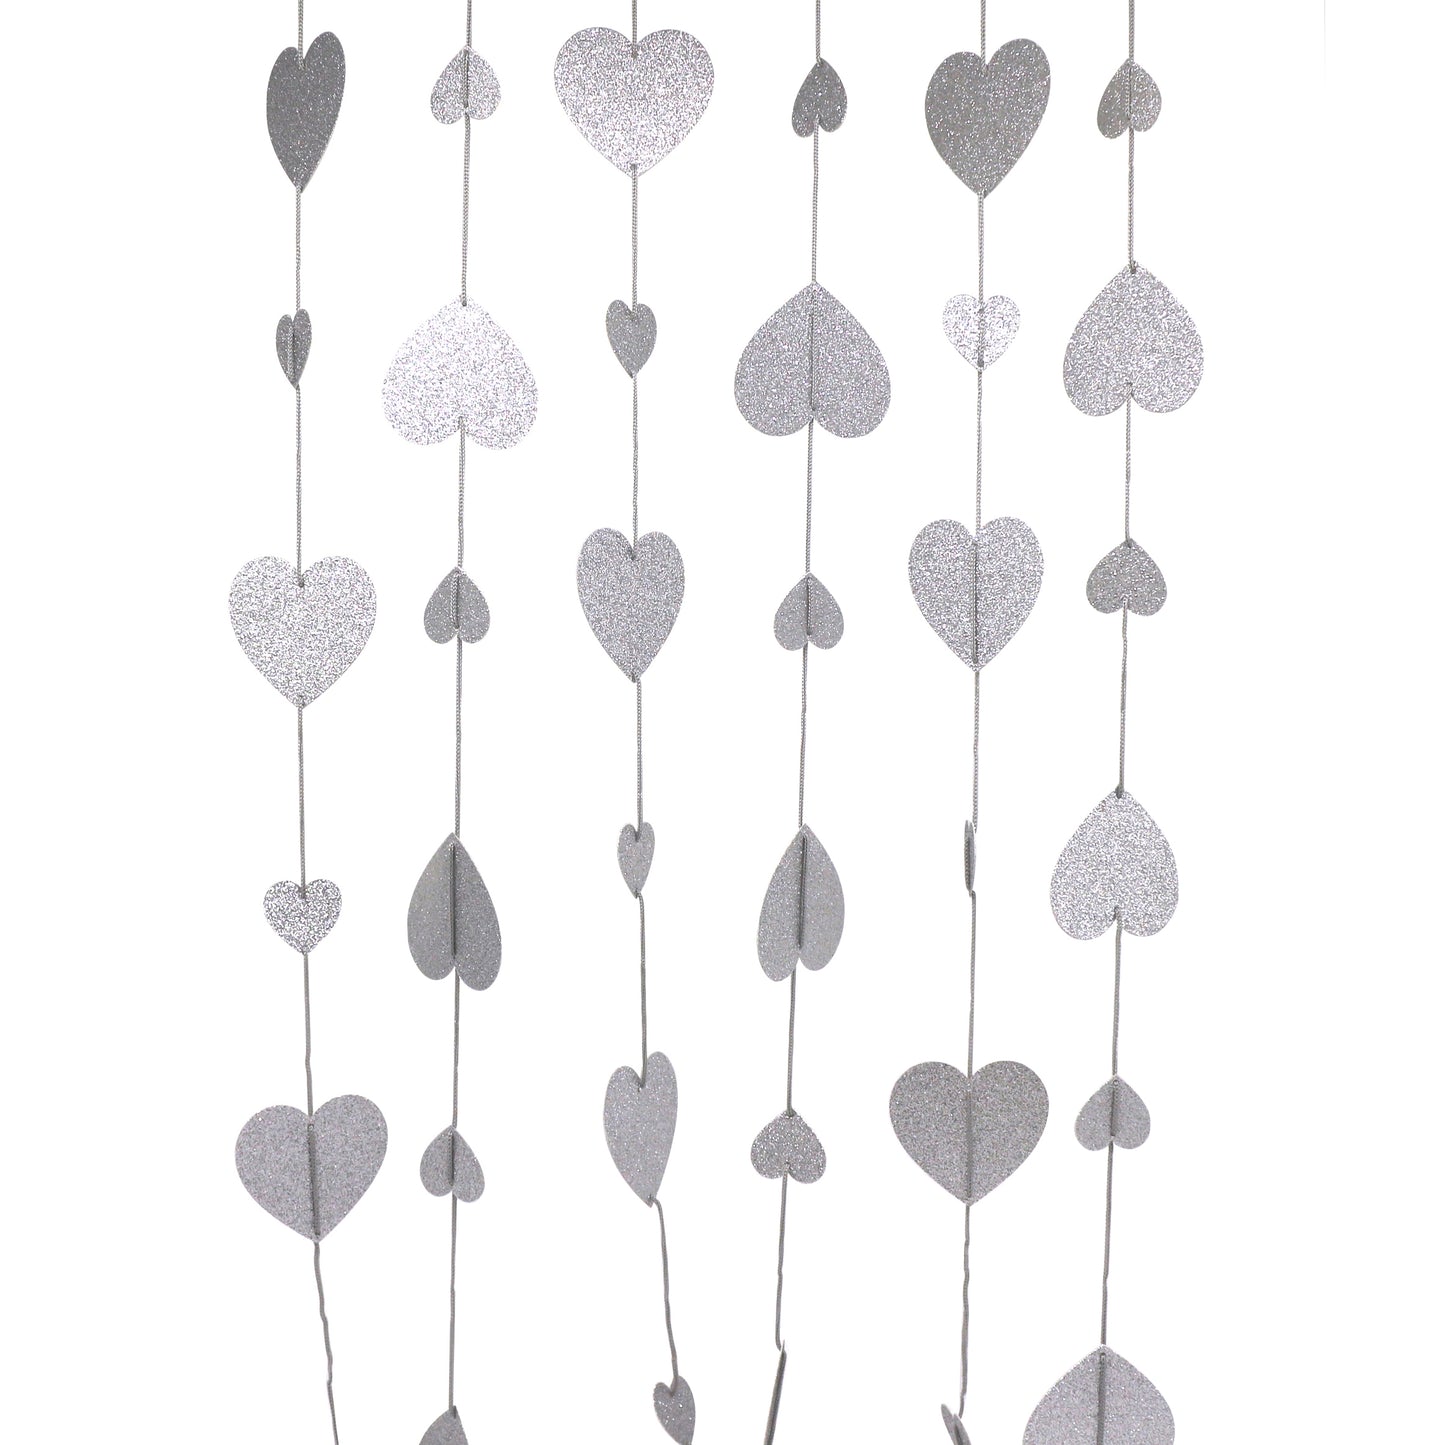 CVHOMEDECO. Twinkle Glittered Paper Heart Shape String Garland Unique Hanging Bunting Banner for Wedding Birthday Party Festival Home Background Decoration, 5.5 feet, Pack of 2 PCS (Silver)